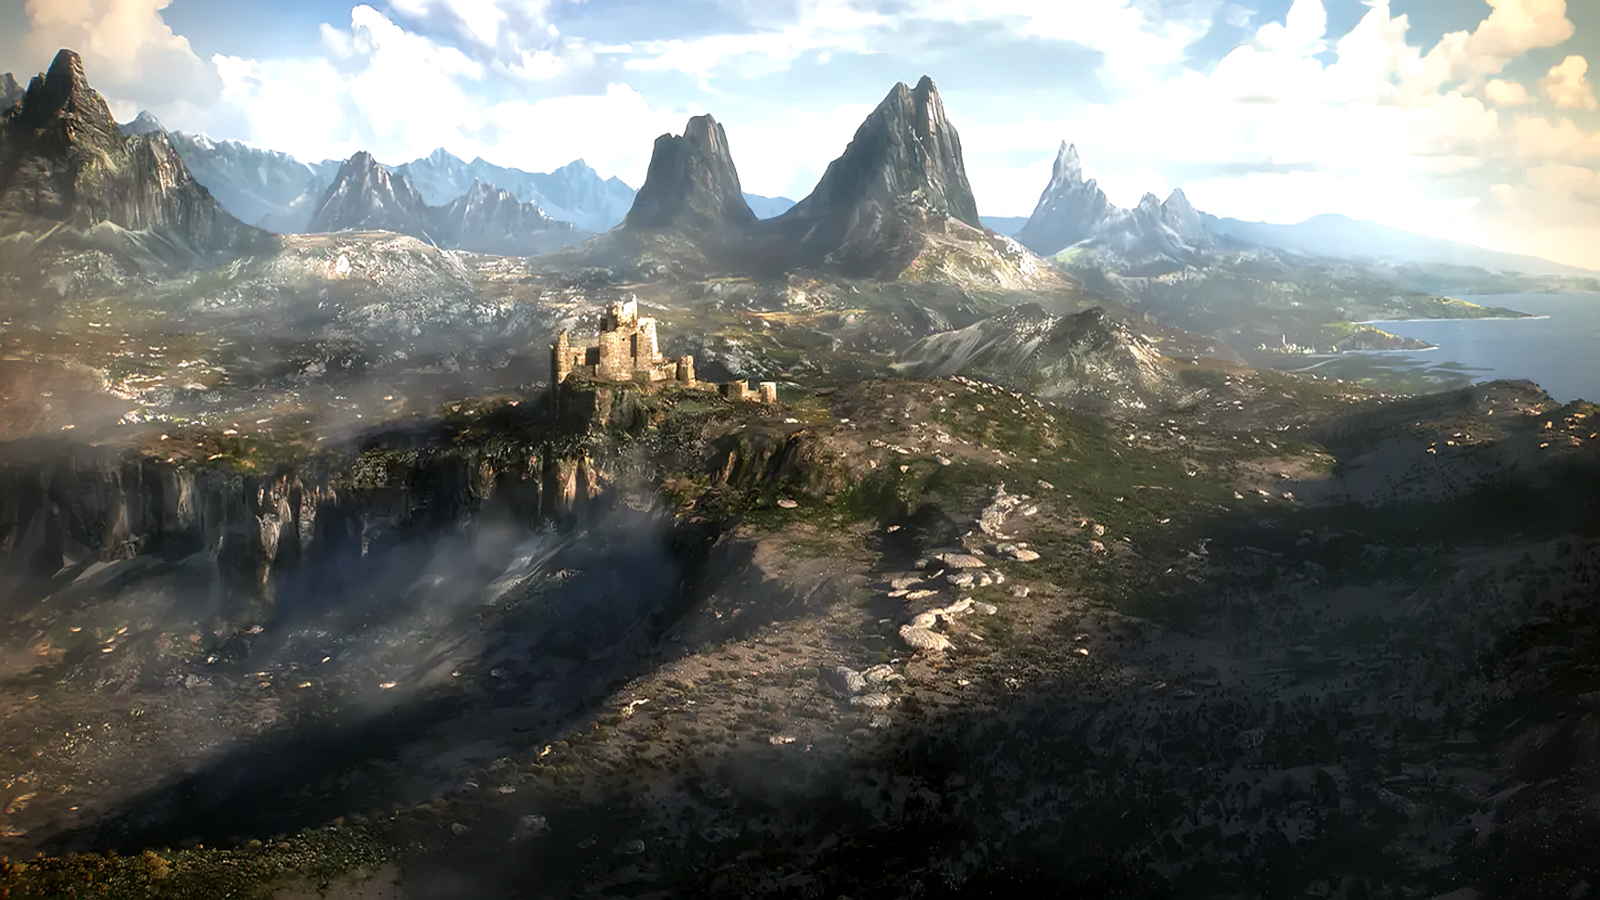 The Elder Scrolls 6 Is In Pre-Production, Todd Howard Confirms